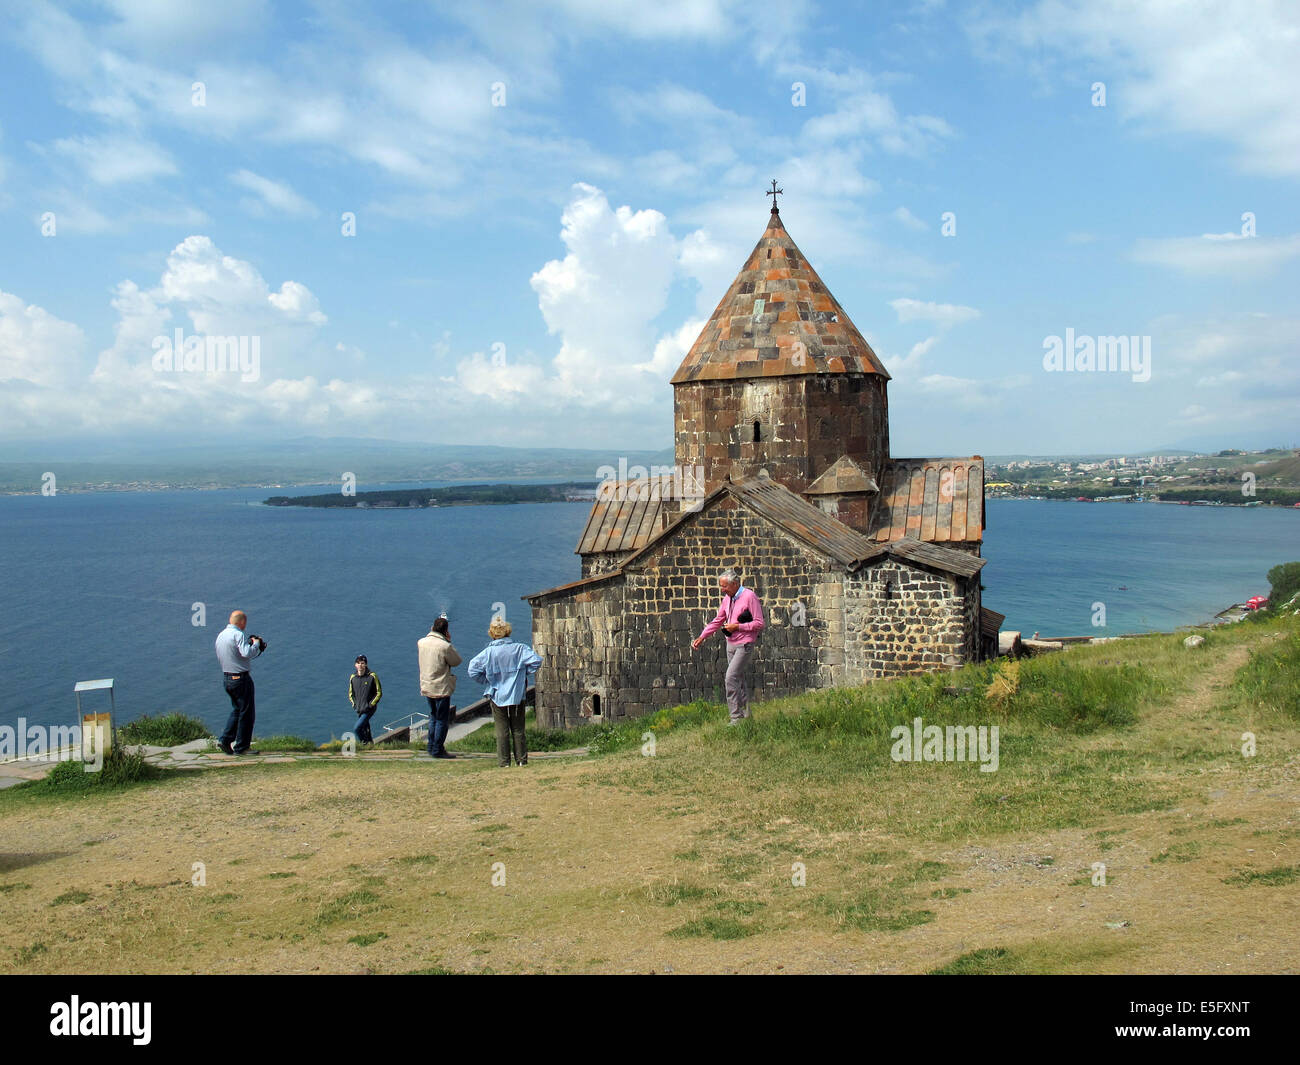 The Sewanawank monastery, founded in 874 at Lake Sewan, Armenia, 24 June 2014. The monastery used to be located on a small island in the lake. Due to a lower water level because of a use of the lake water for irrigation the island with the monastery now is a peninsula. Photo: Jens Kalaene Stock Photo